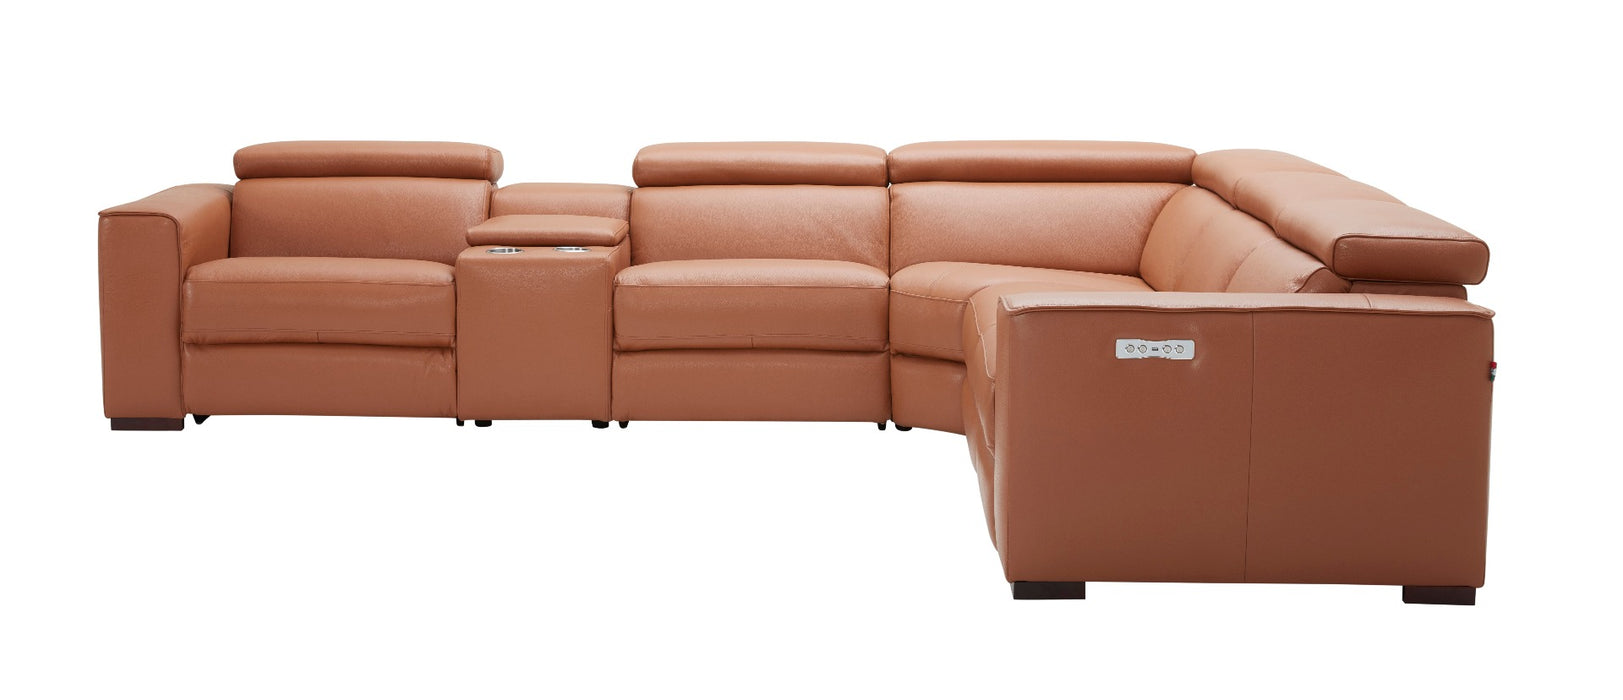 J&M Furniture - Picasso Motion Sectional in Caramel - 18865-C